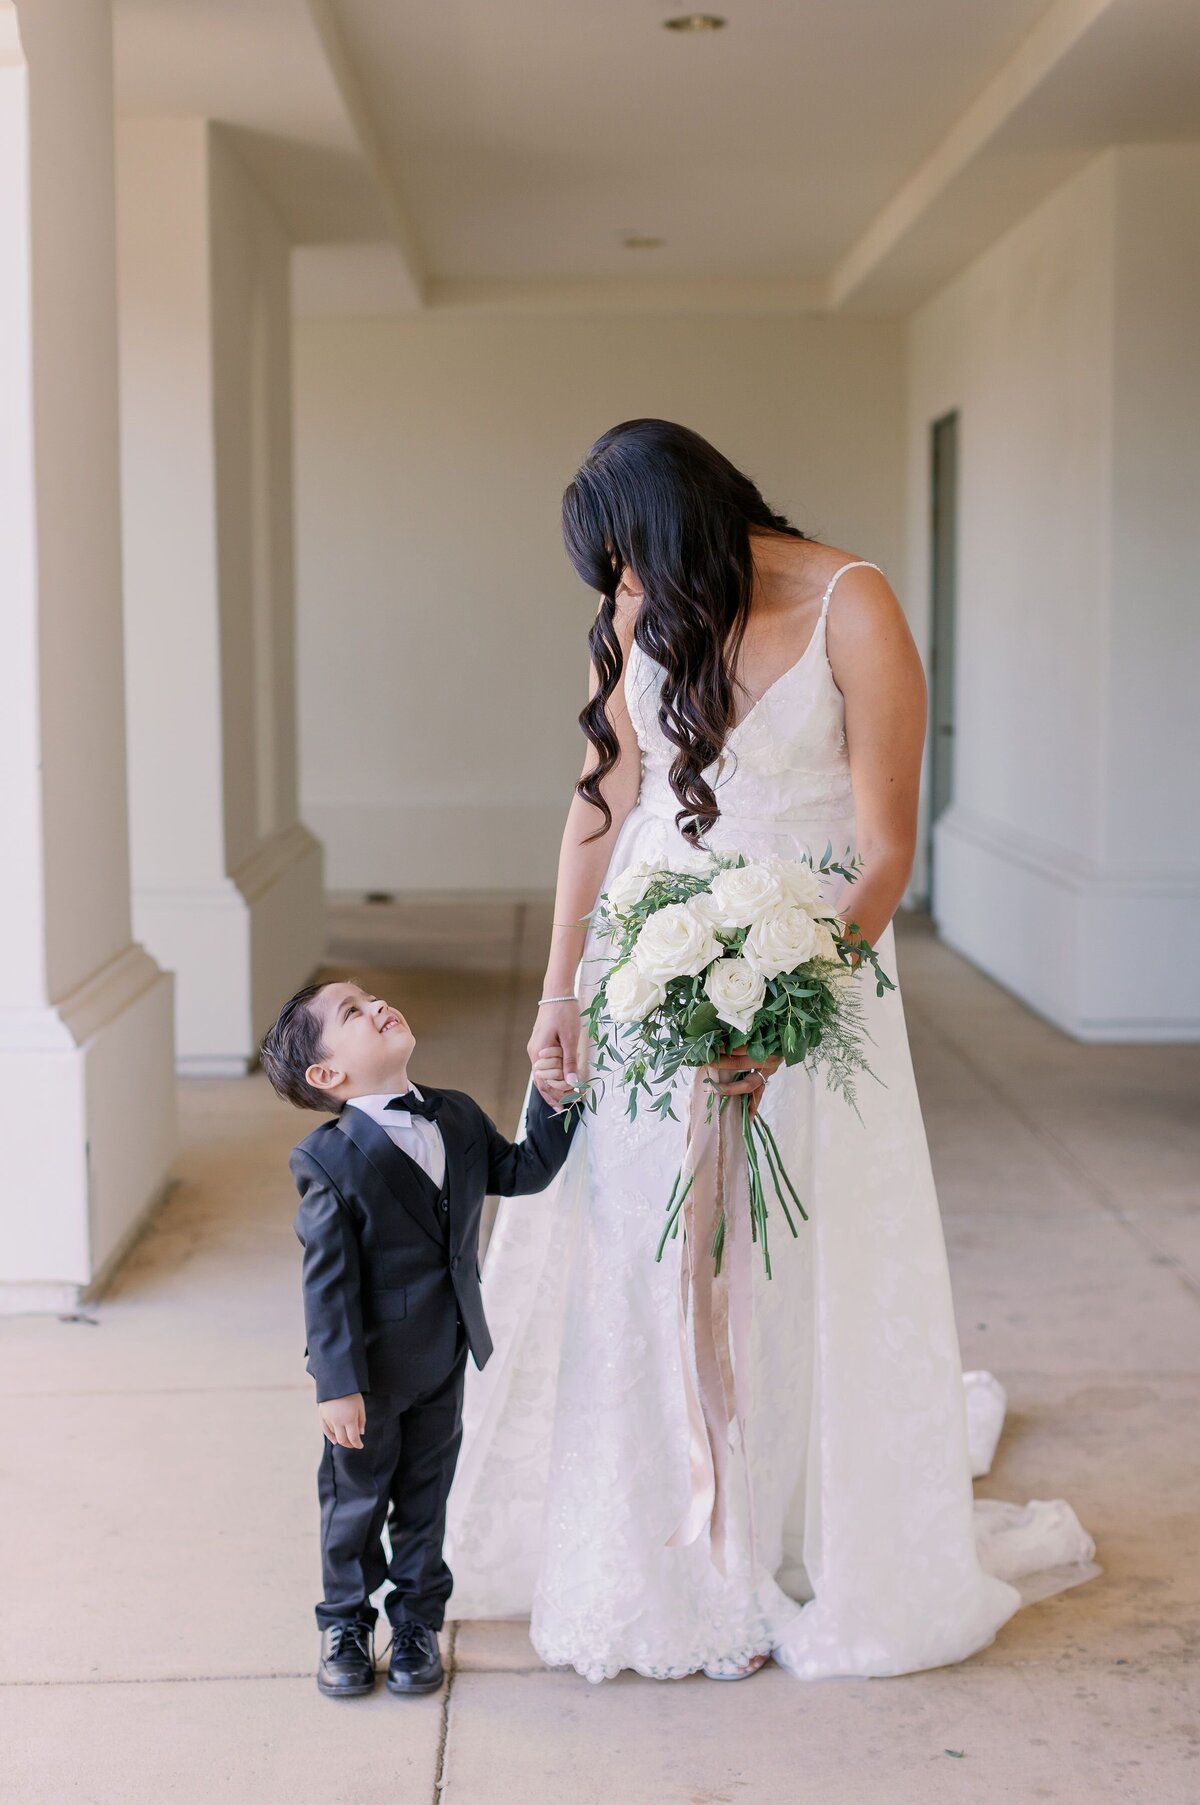 This little man is wearing a lovely suit standing next to the bride who holds a large white rose bouquet.